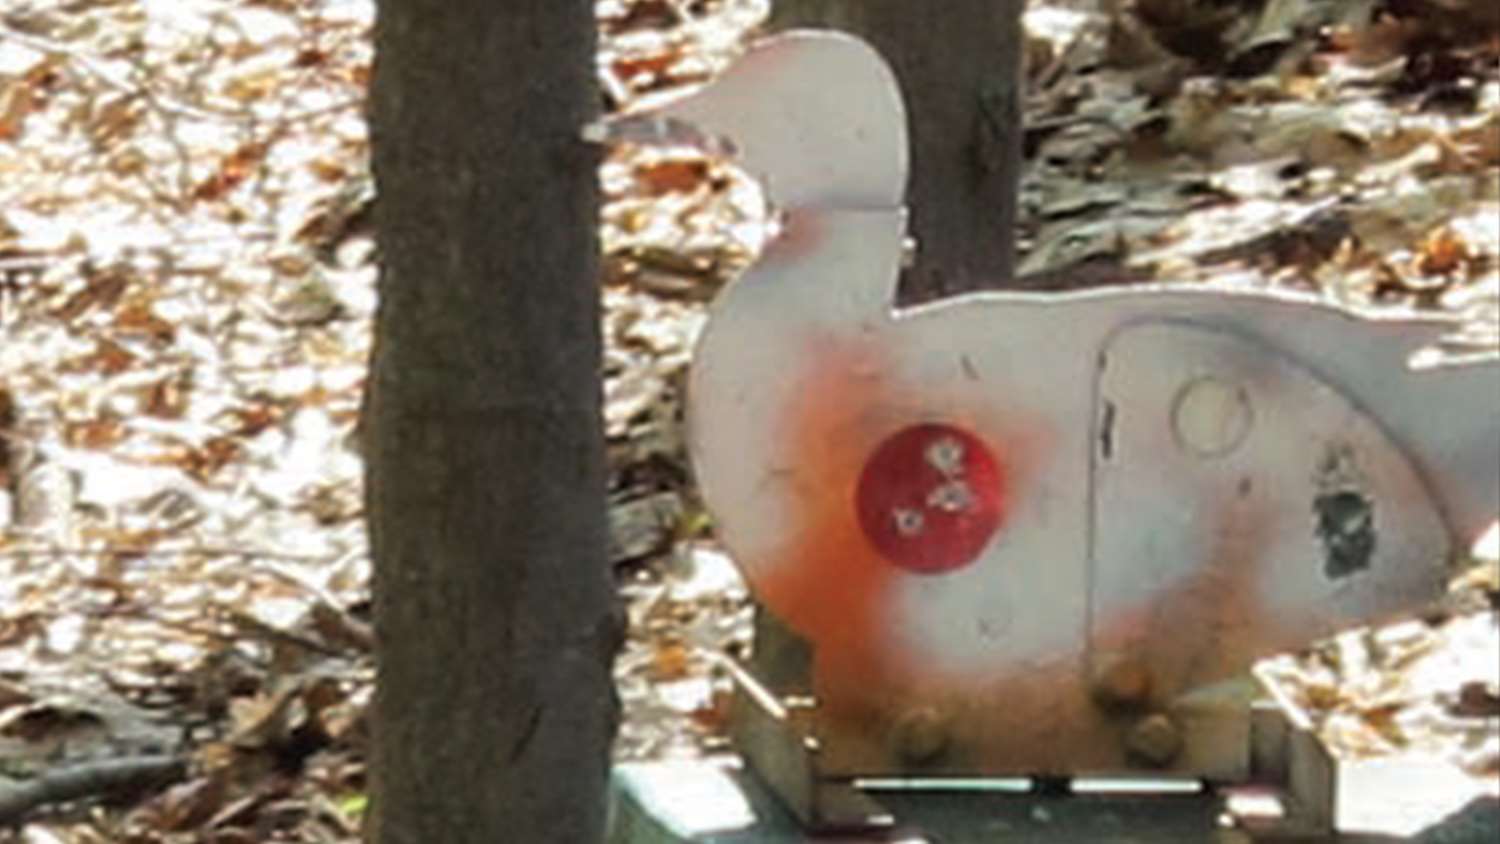 Typical field target